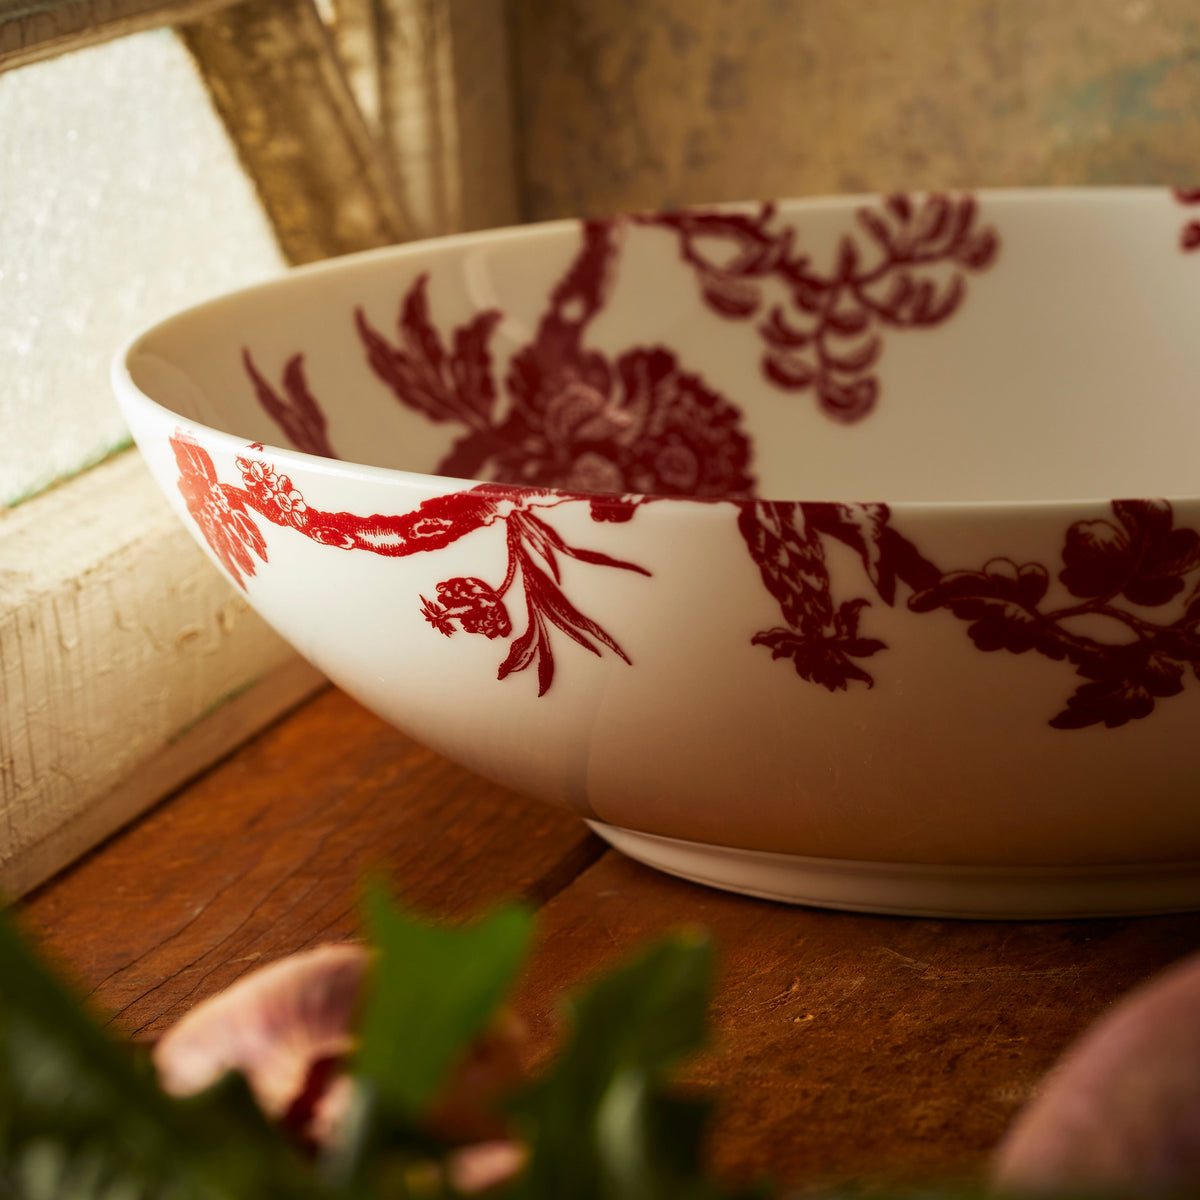 A detail photo showing the floral pattern of the Arcadia Wide Serving Bowl by Caskata.